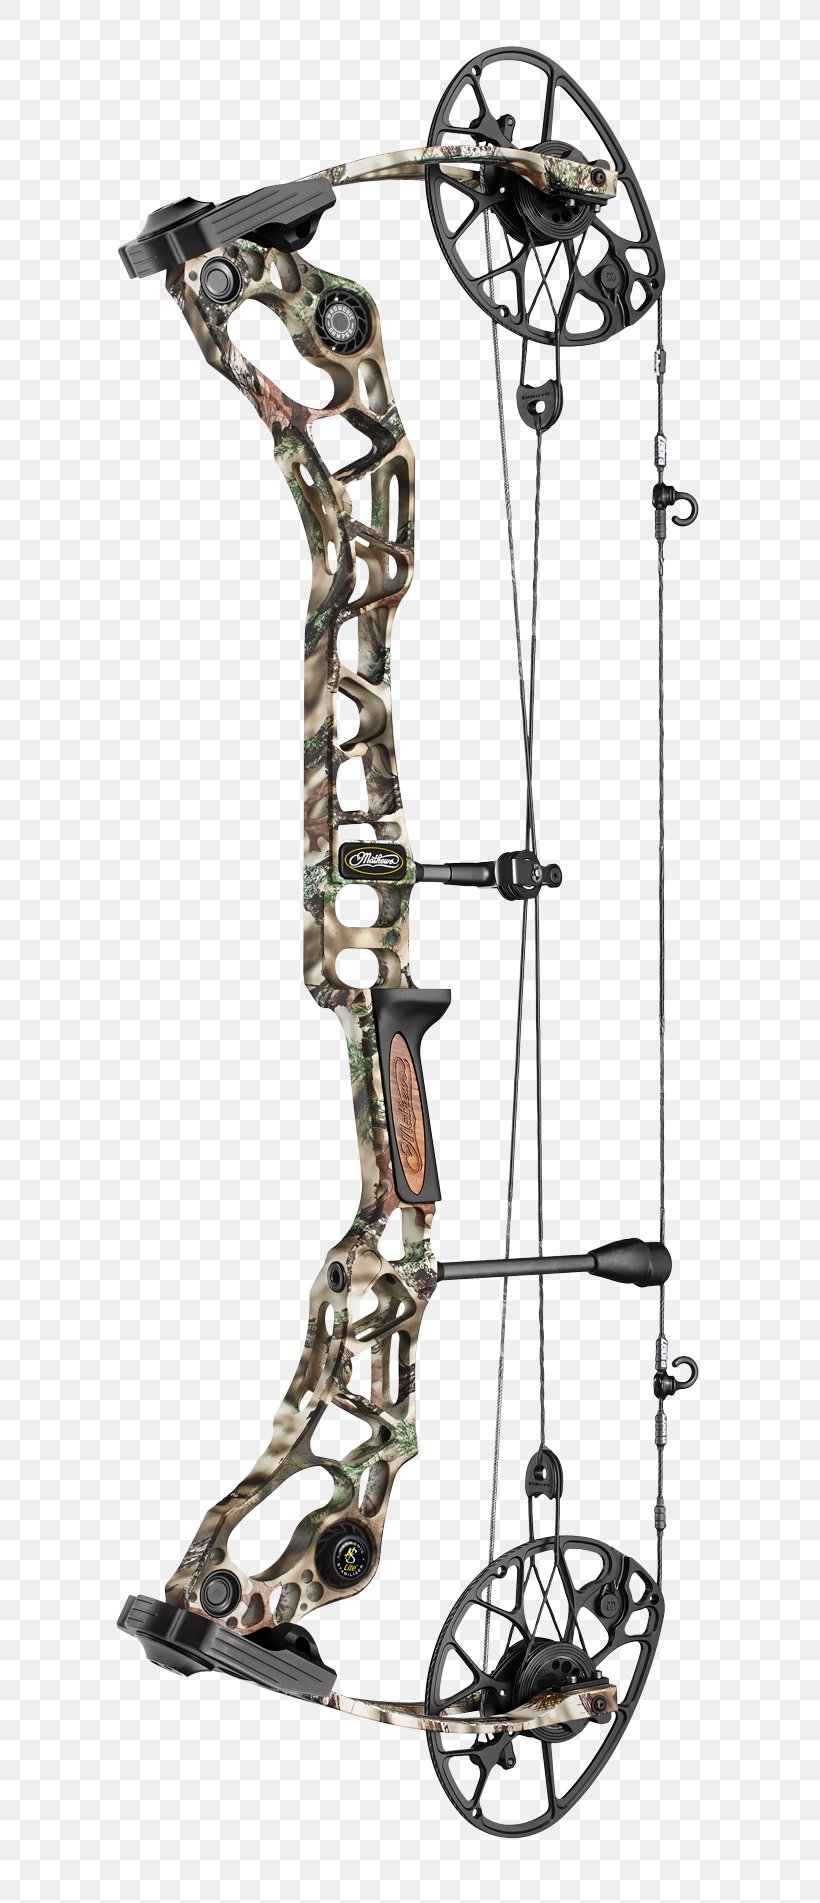 Mathews Archery, Inc. Compound Bows Bow And Arrow Hunting, PNG, 691x1903px, Mathews Archery Inc, Archery, Bit, Bow, Bow And Arrow Download Free